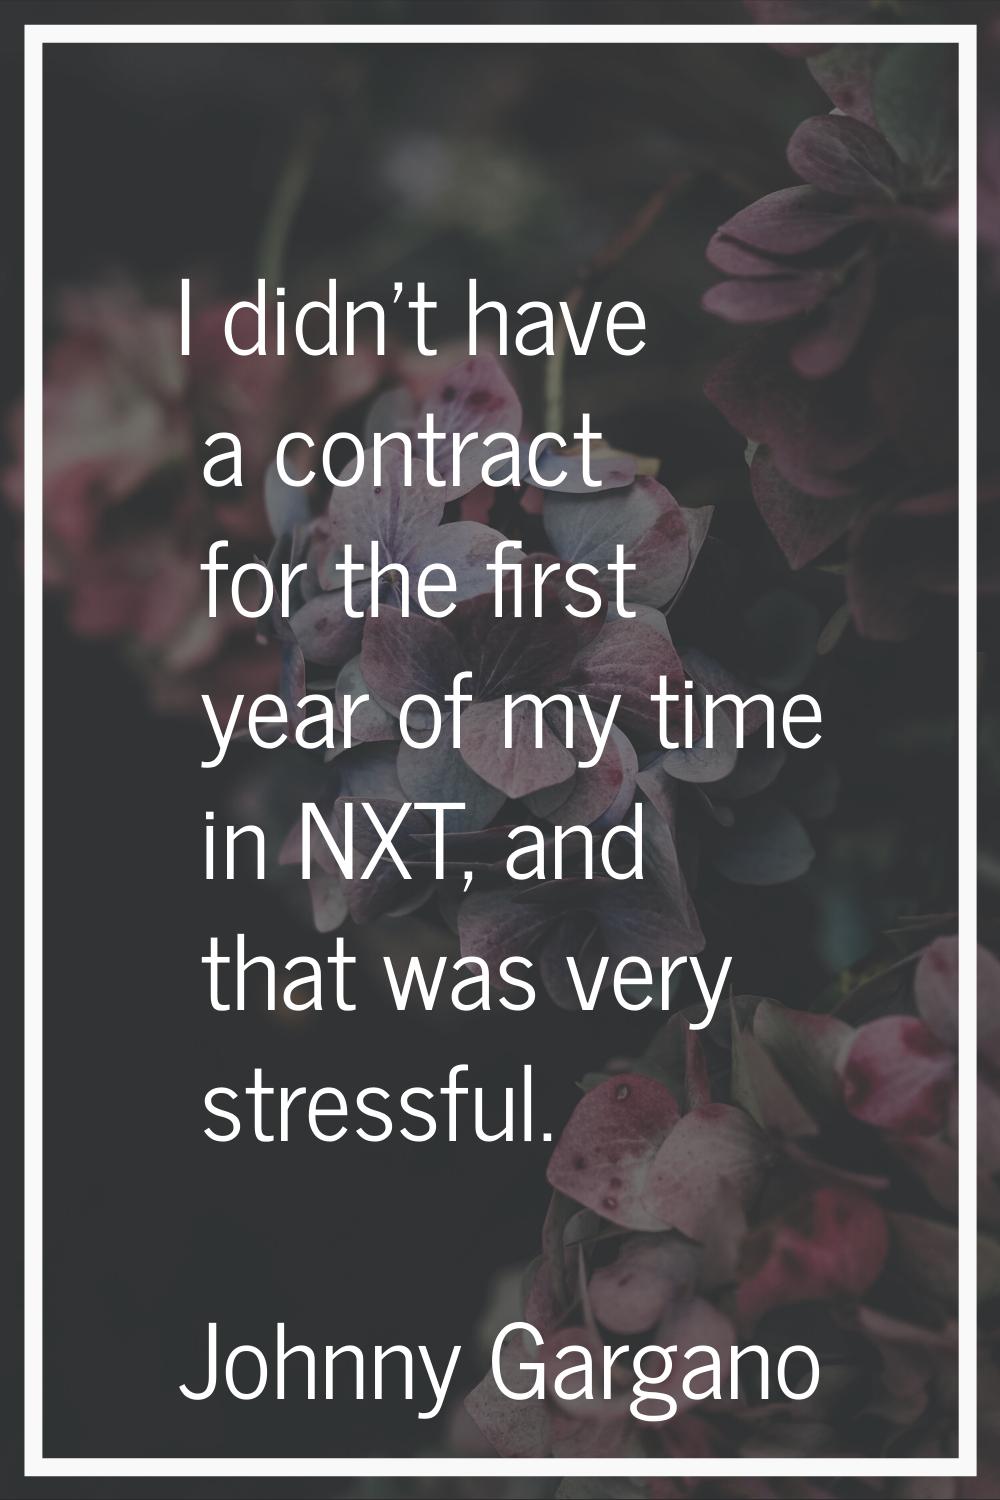 I didn't have a contract for the first year of my time in NXT, and that was very stressful.